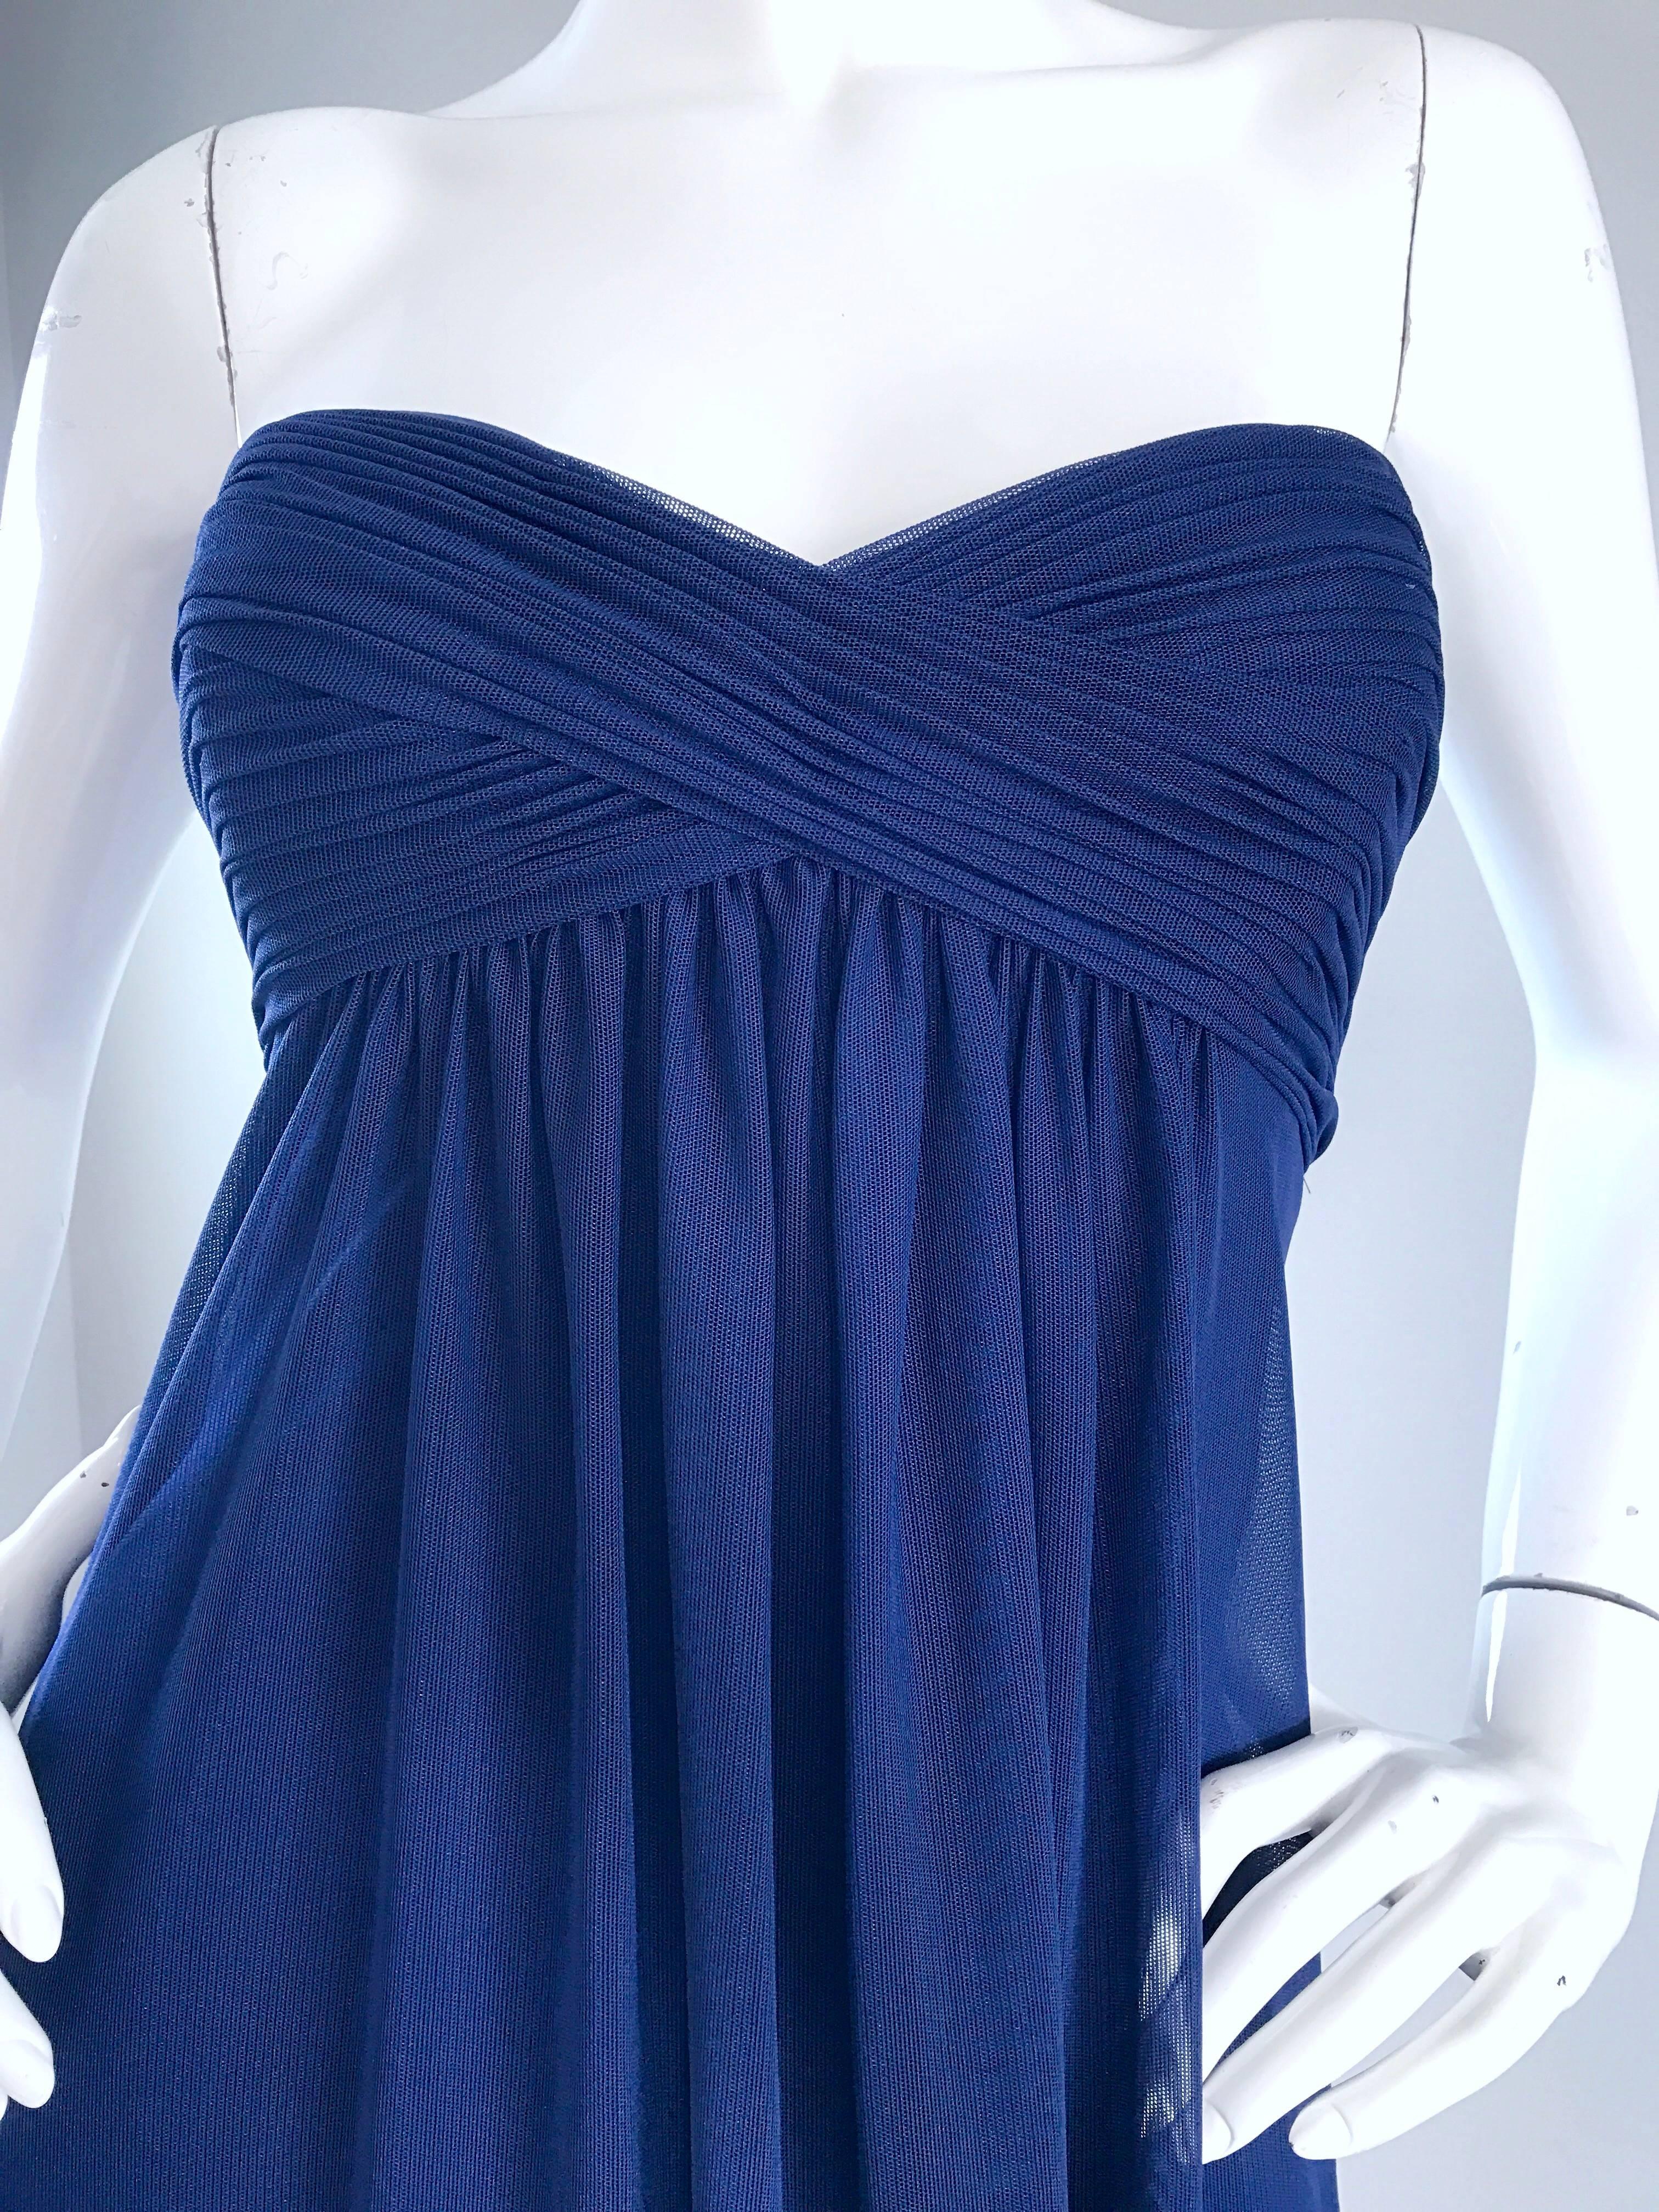 Stunning vintage VICKY TIEL COUTURE rich navy blue strapless gown / maxi dress ! Features flattering ruched detail at the bust, with a free flowing empire waist fit. Navy mesh over navy blue silk. Boned bodice. Hidden zipper up the back. Impeccable